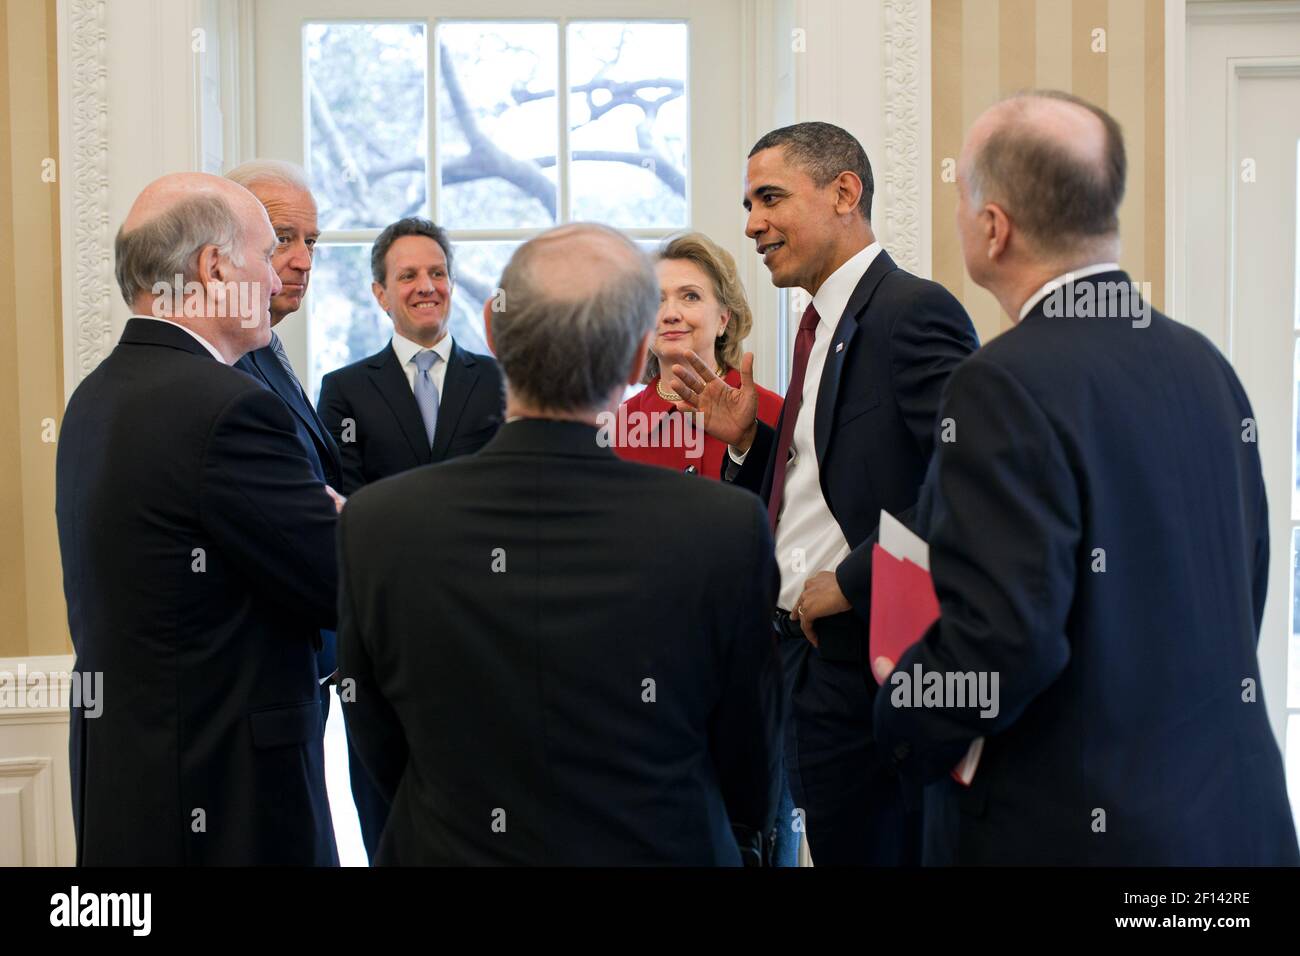 President Barack Obama and Vice President Joe Biden talk with senior administration officials in the Oval Office, Jan. 19, 2011. Pictured from left are: Bill Daley, Timothy F. Geithner, Jeffrey Bader, Hillary Rodham Clinton, and Tom Donilon Stock Photo